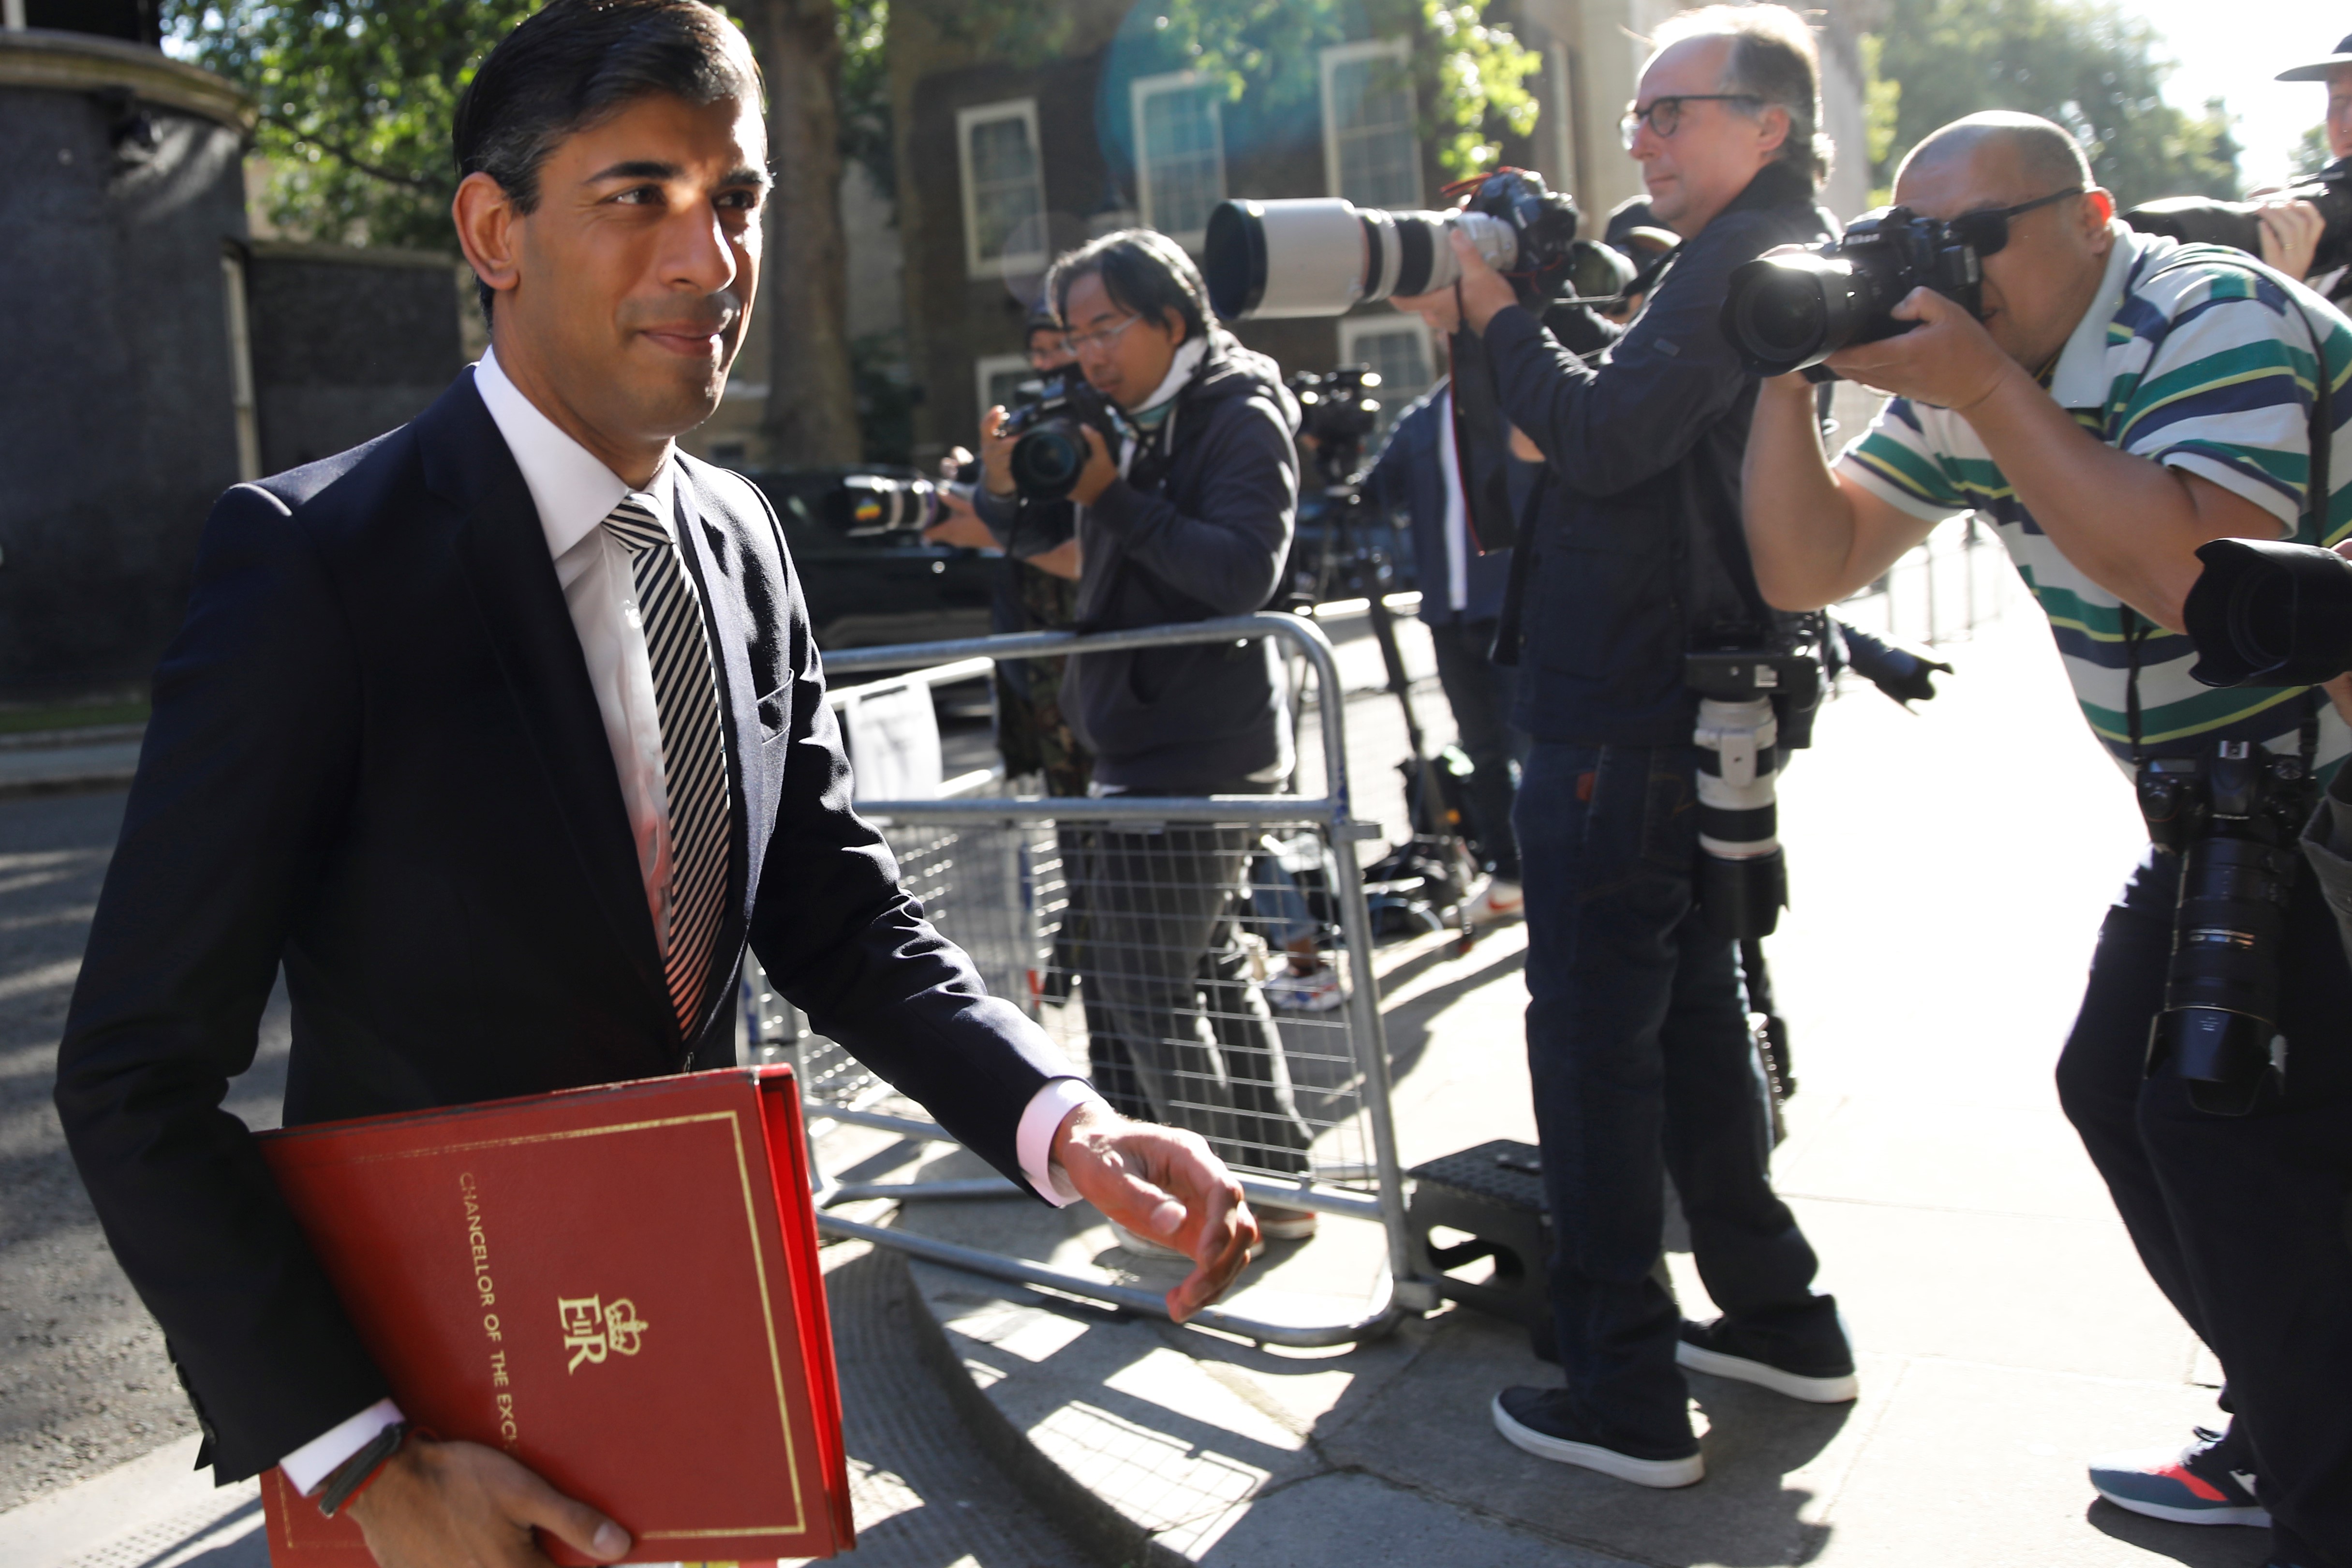 Britain's Chancellor of the Exchequer Rishi Sunak leaves Downing Street in central London to participate in the first in person cabinet meeting since the coronavirus lockdown at the Foreign and Commonwealth office on July 21, 2020.